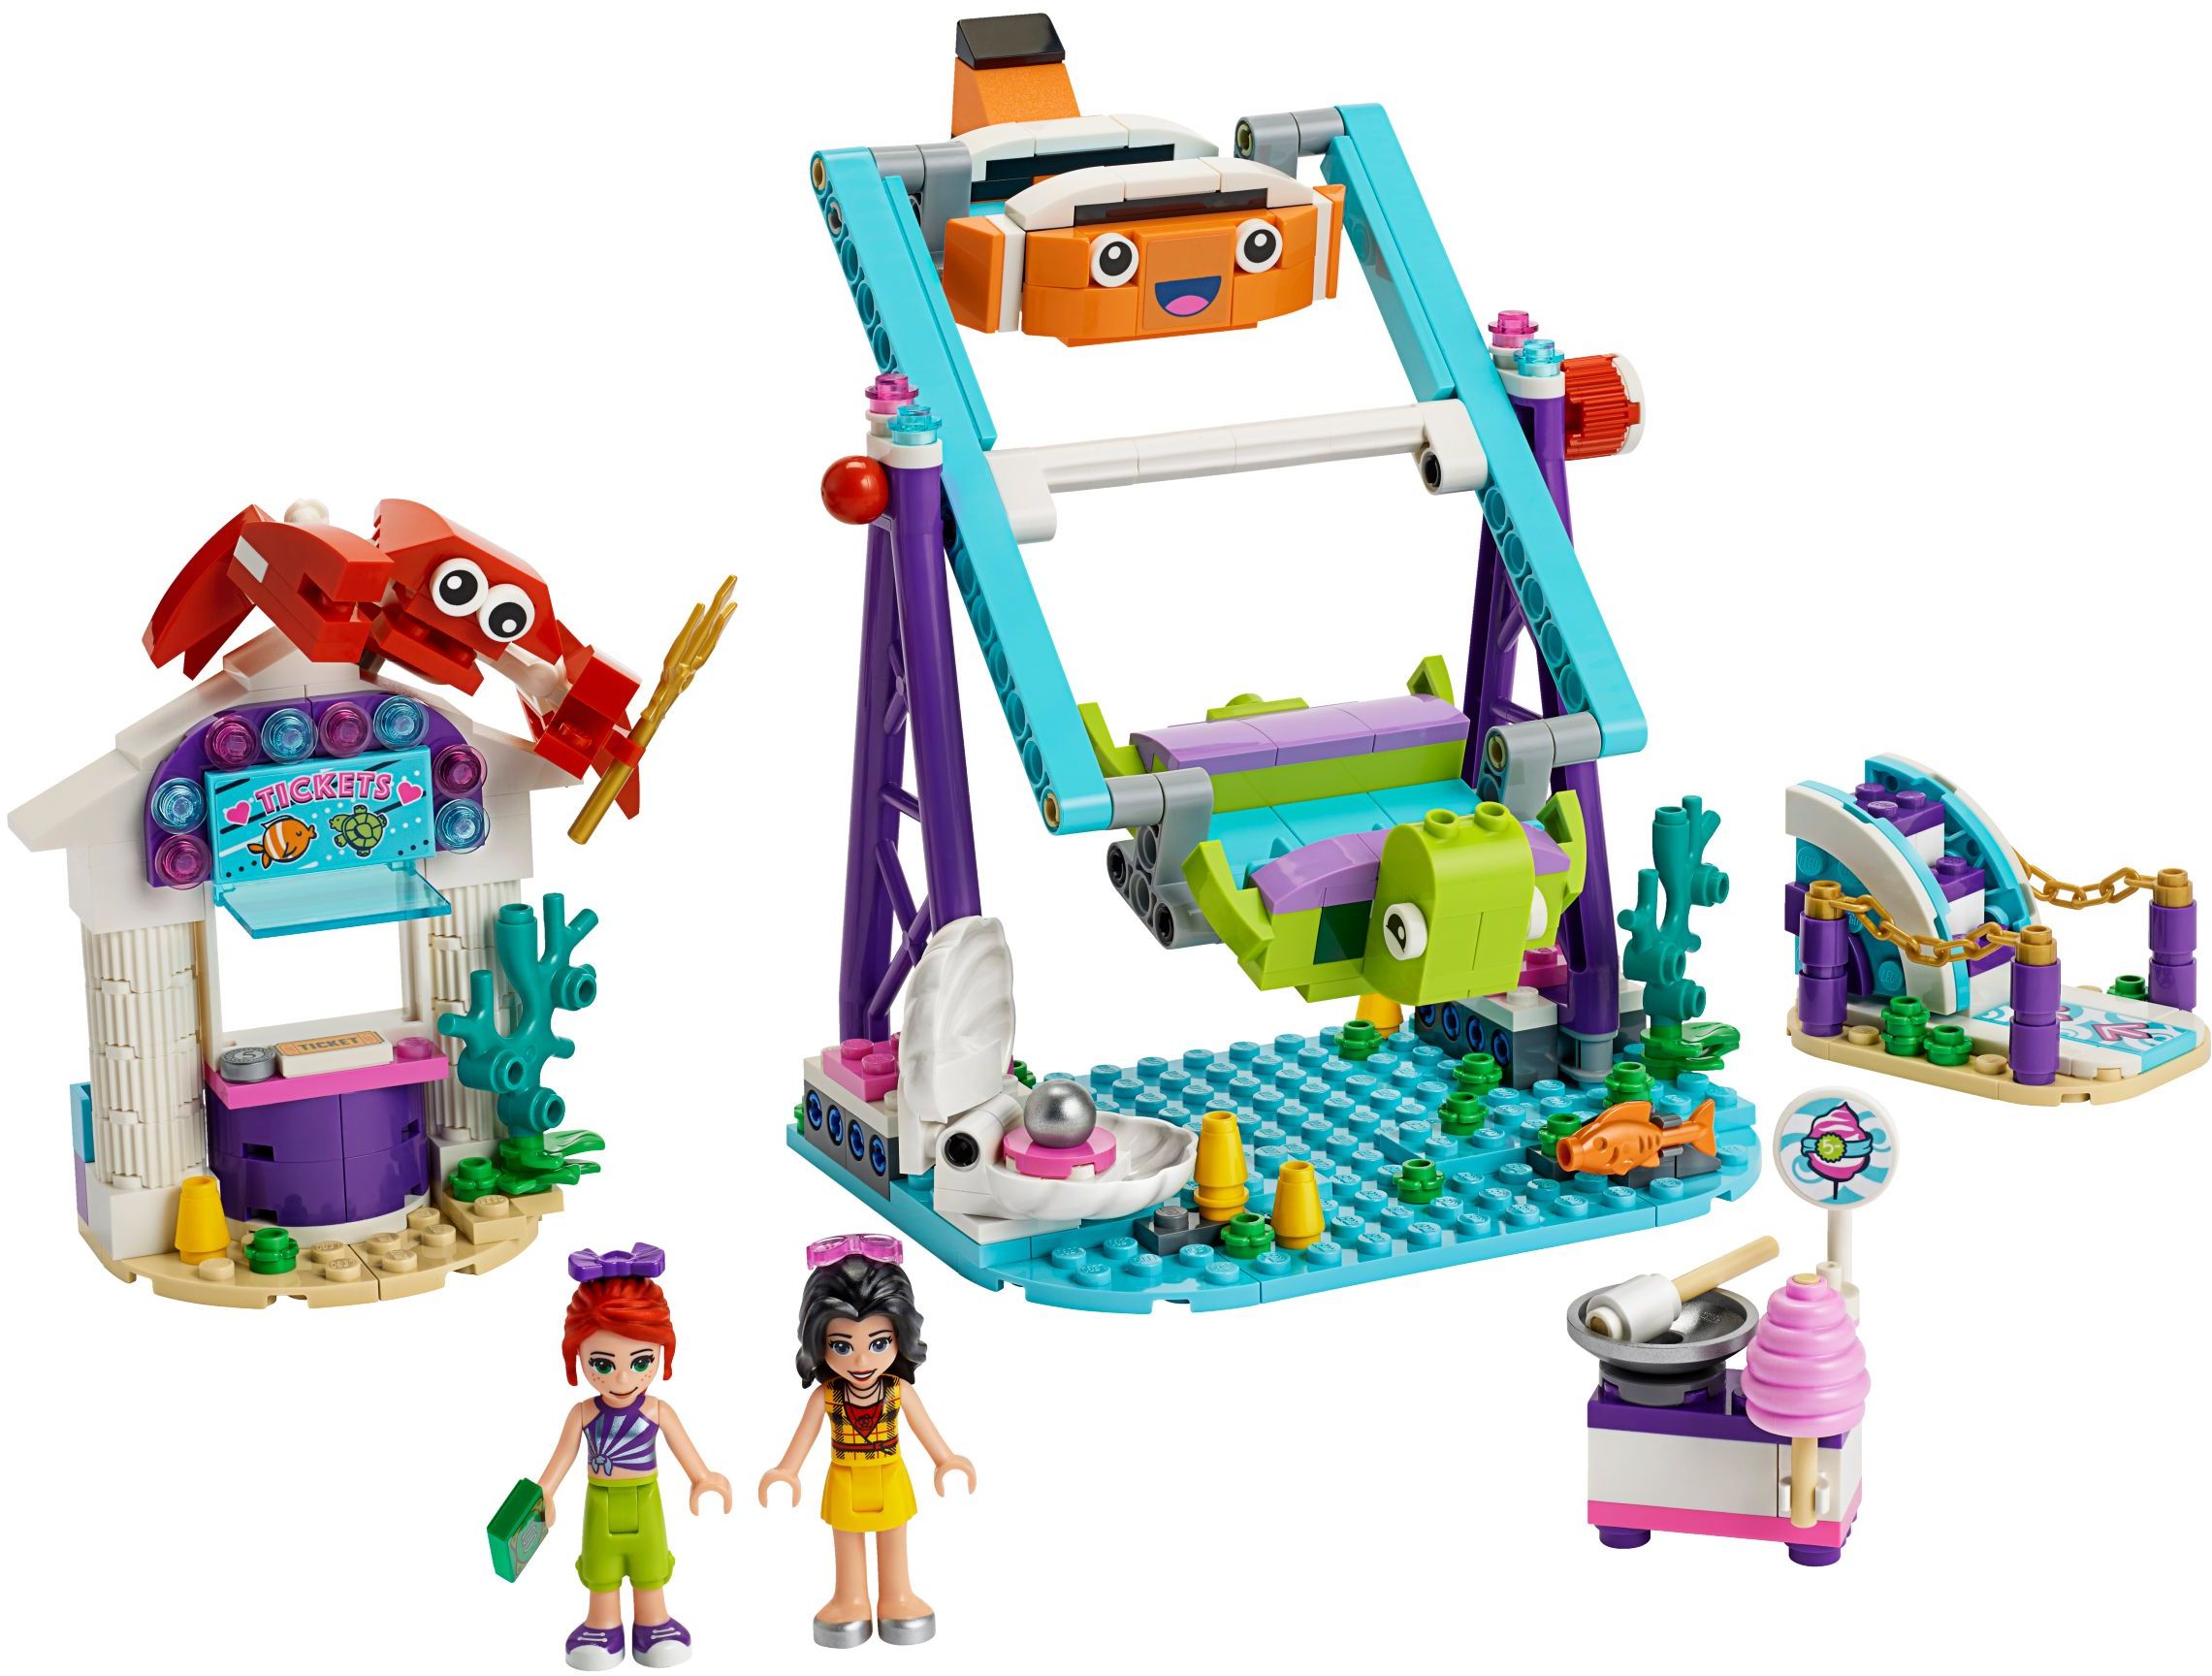 new 2019 lego friends sets